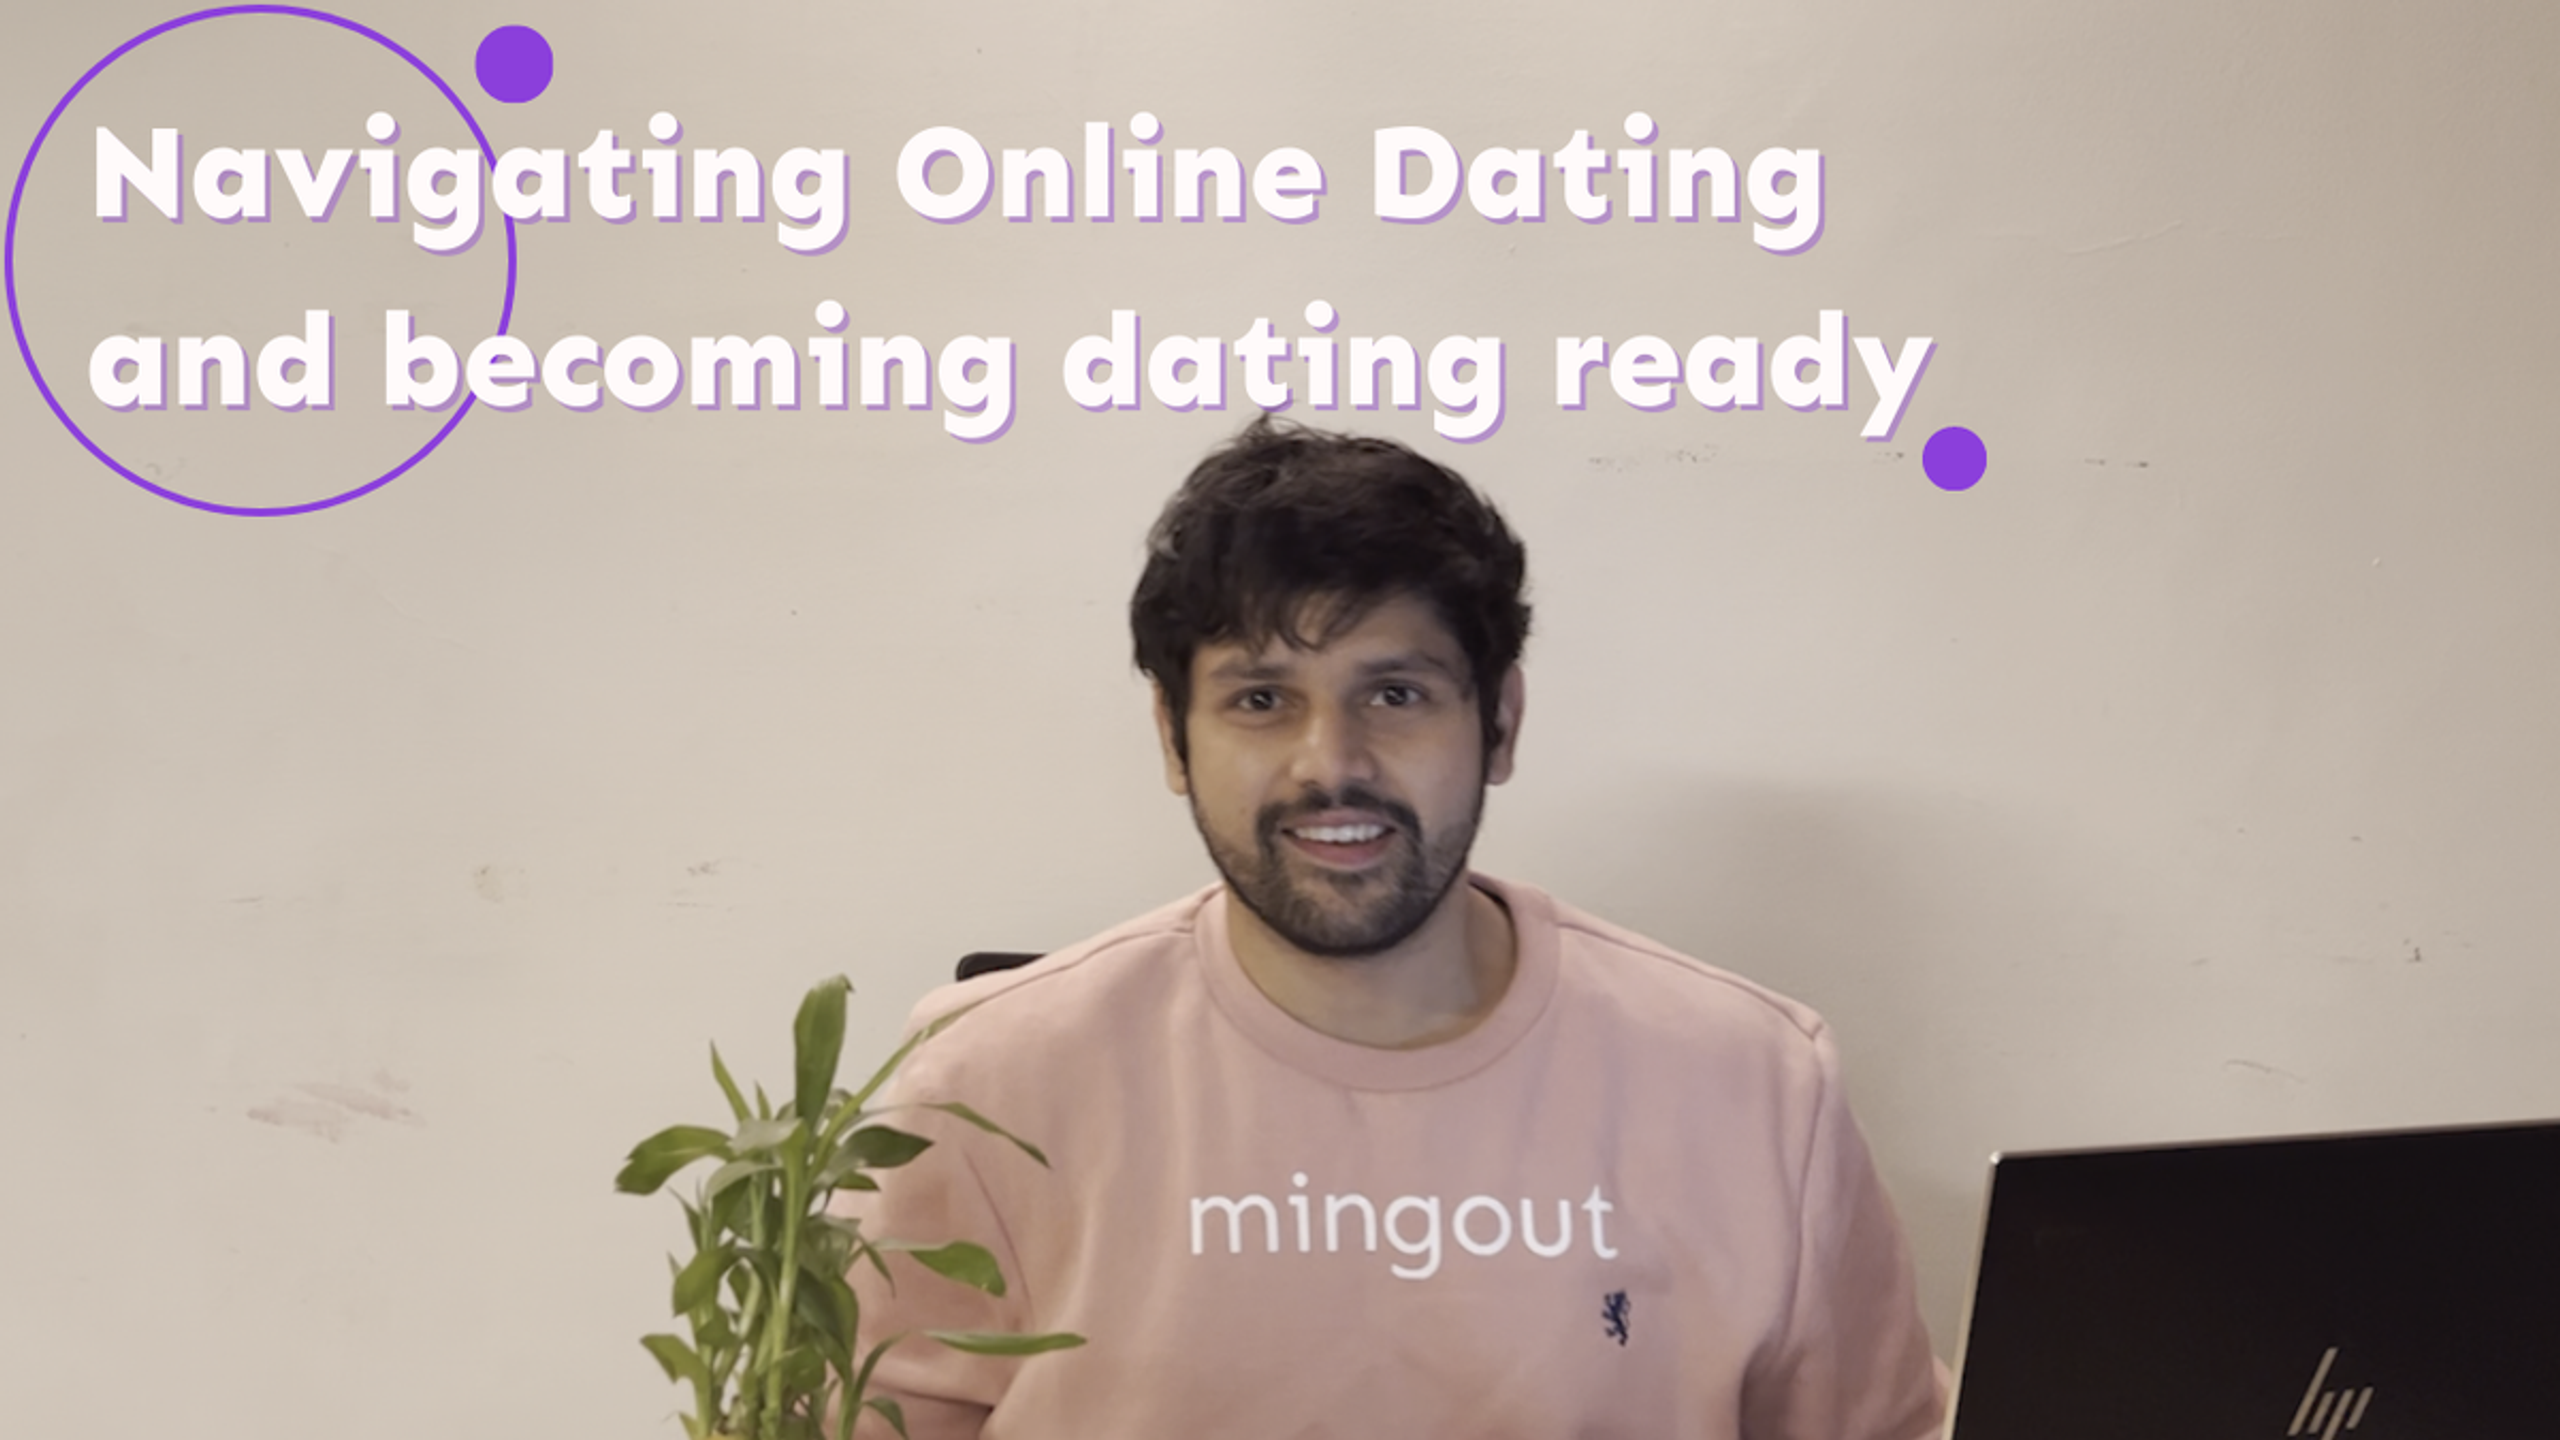 Intro: Getting started with dating